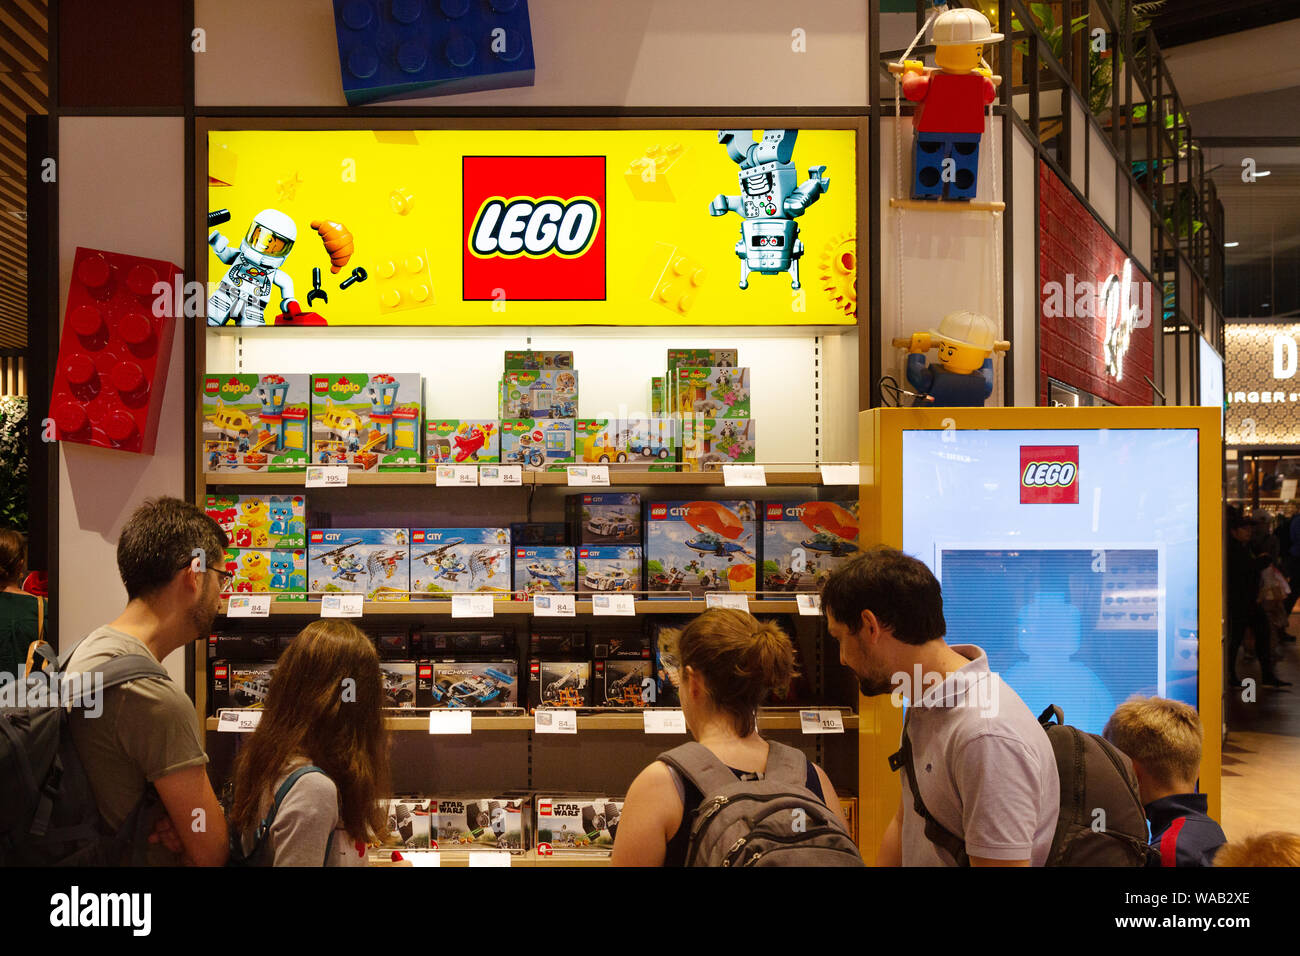 Lego Shop High Resolution Stock Photography and Images - Alamy